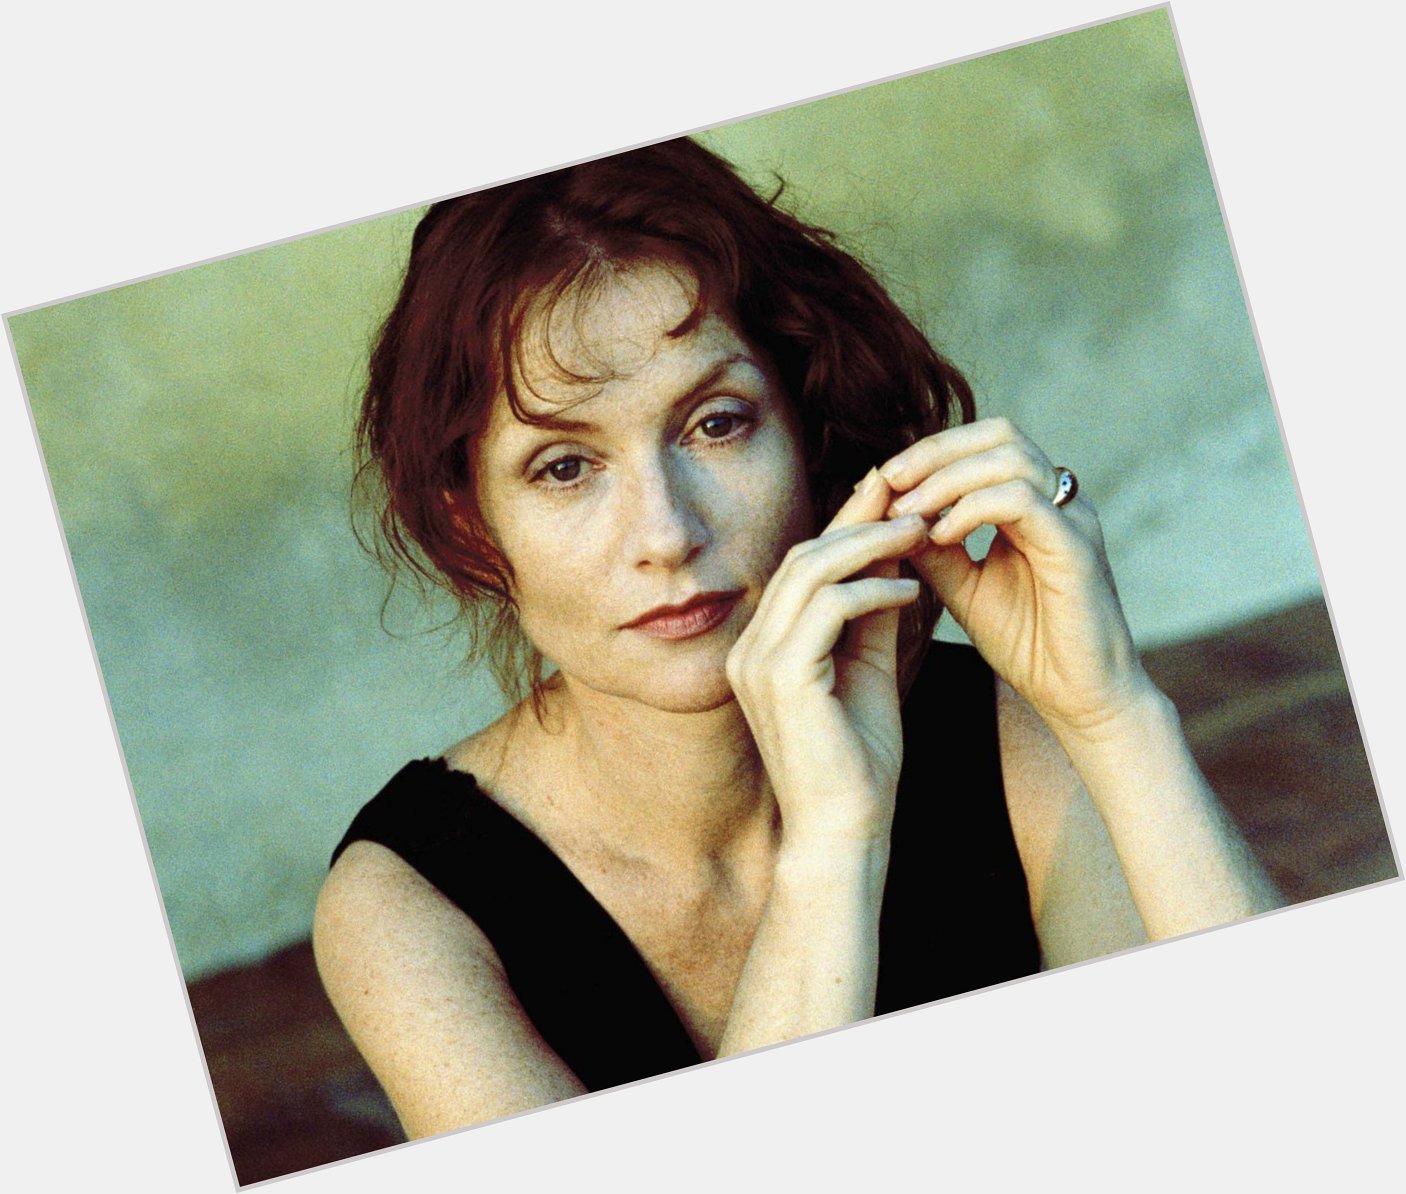 Happy birthday to the one and only Isabelle Huppert. 